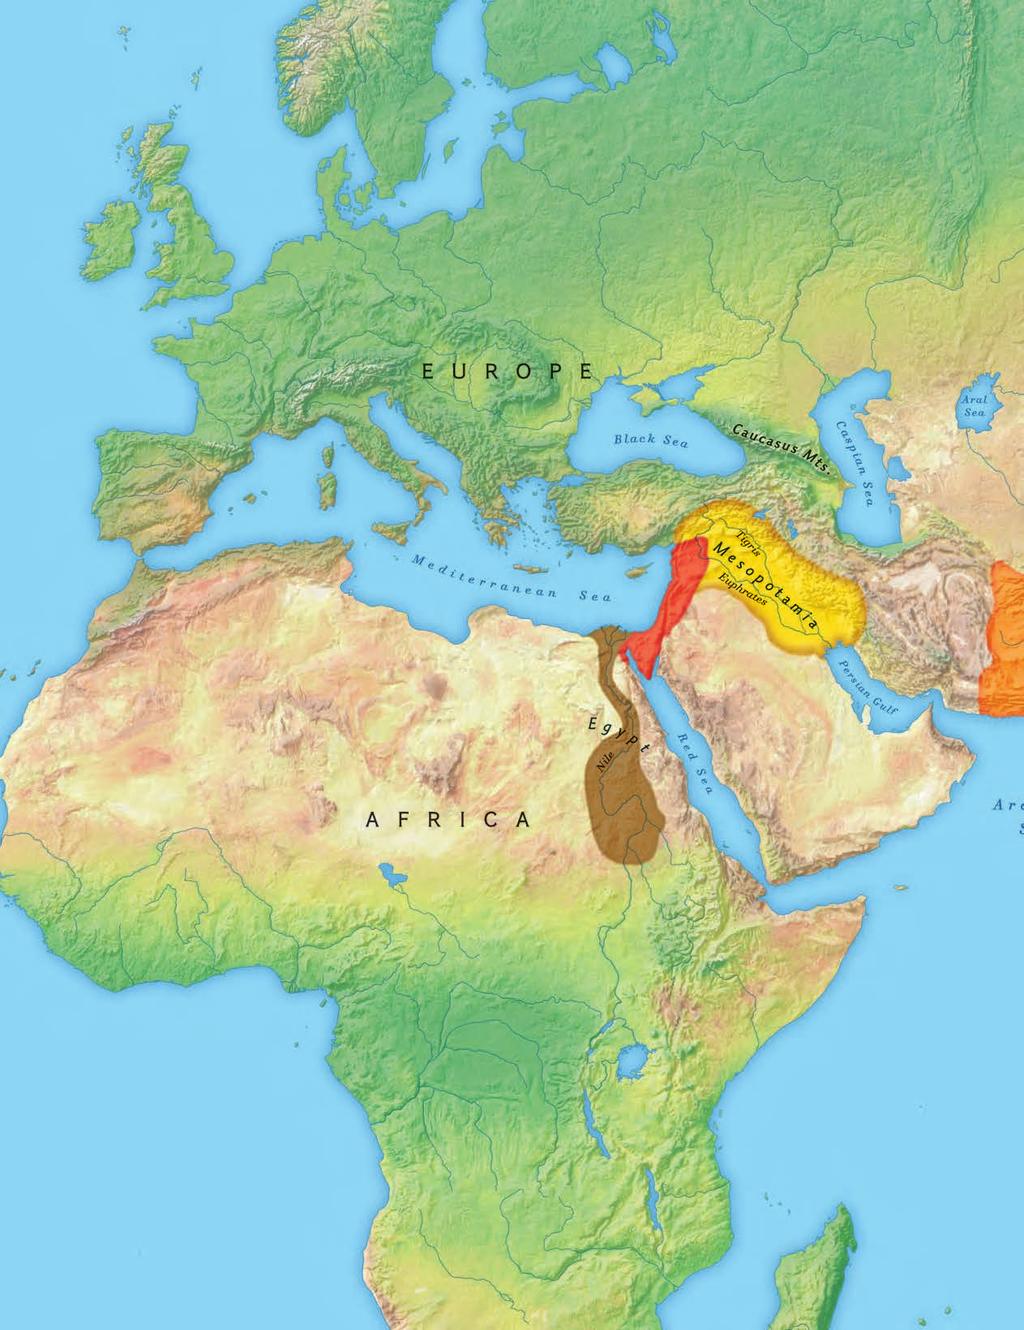 unit 2 4 GEOGRAPHY in HiStORY in HiStORY first Civilizations 3500 b.c.